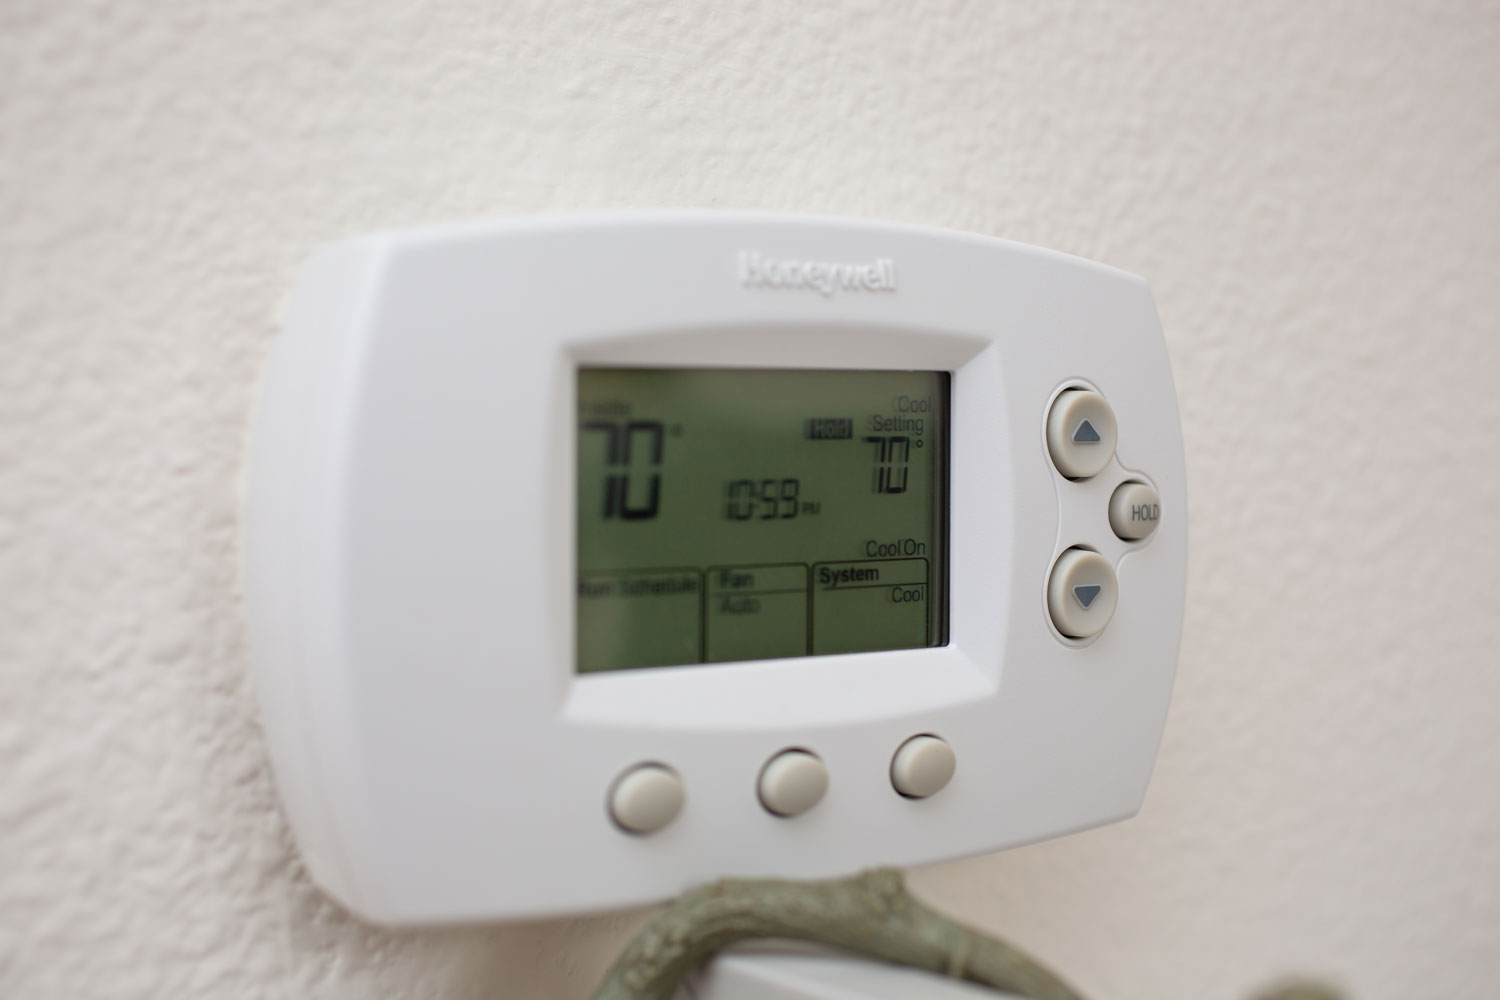 A closeup view of a Honeywell thermostat attached to a wall in a home environment.